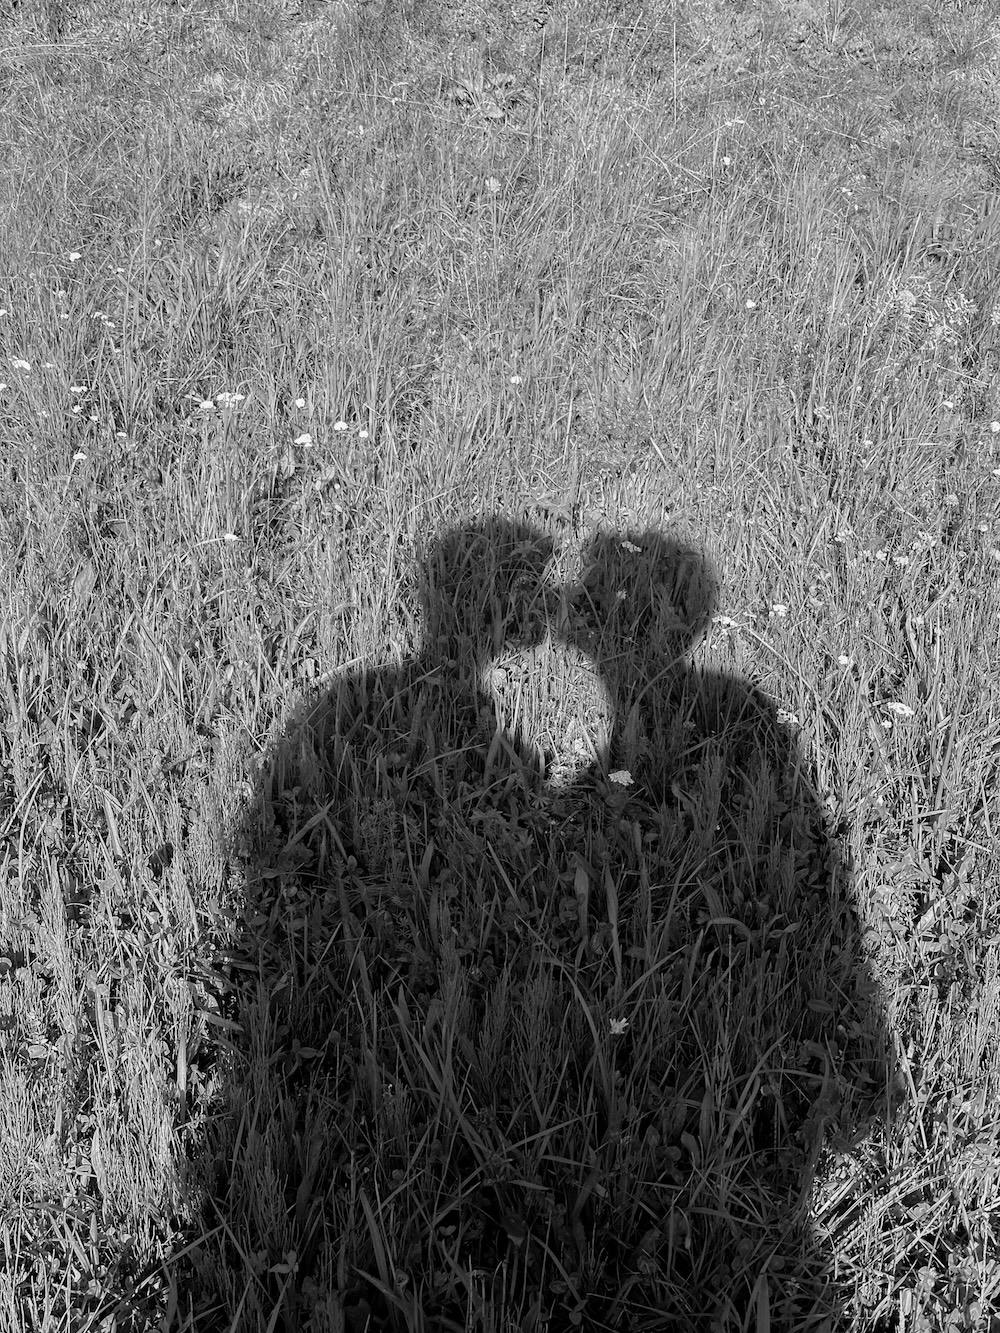 A photo of the shadow on the grass of two people kissing